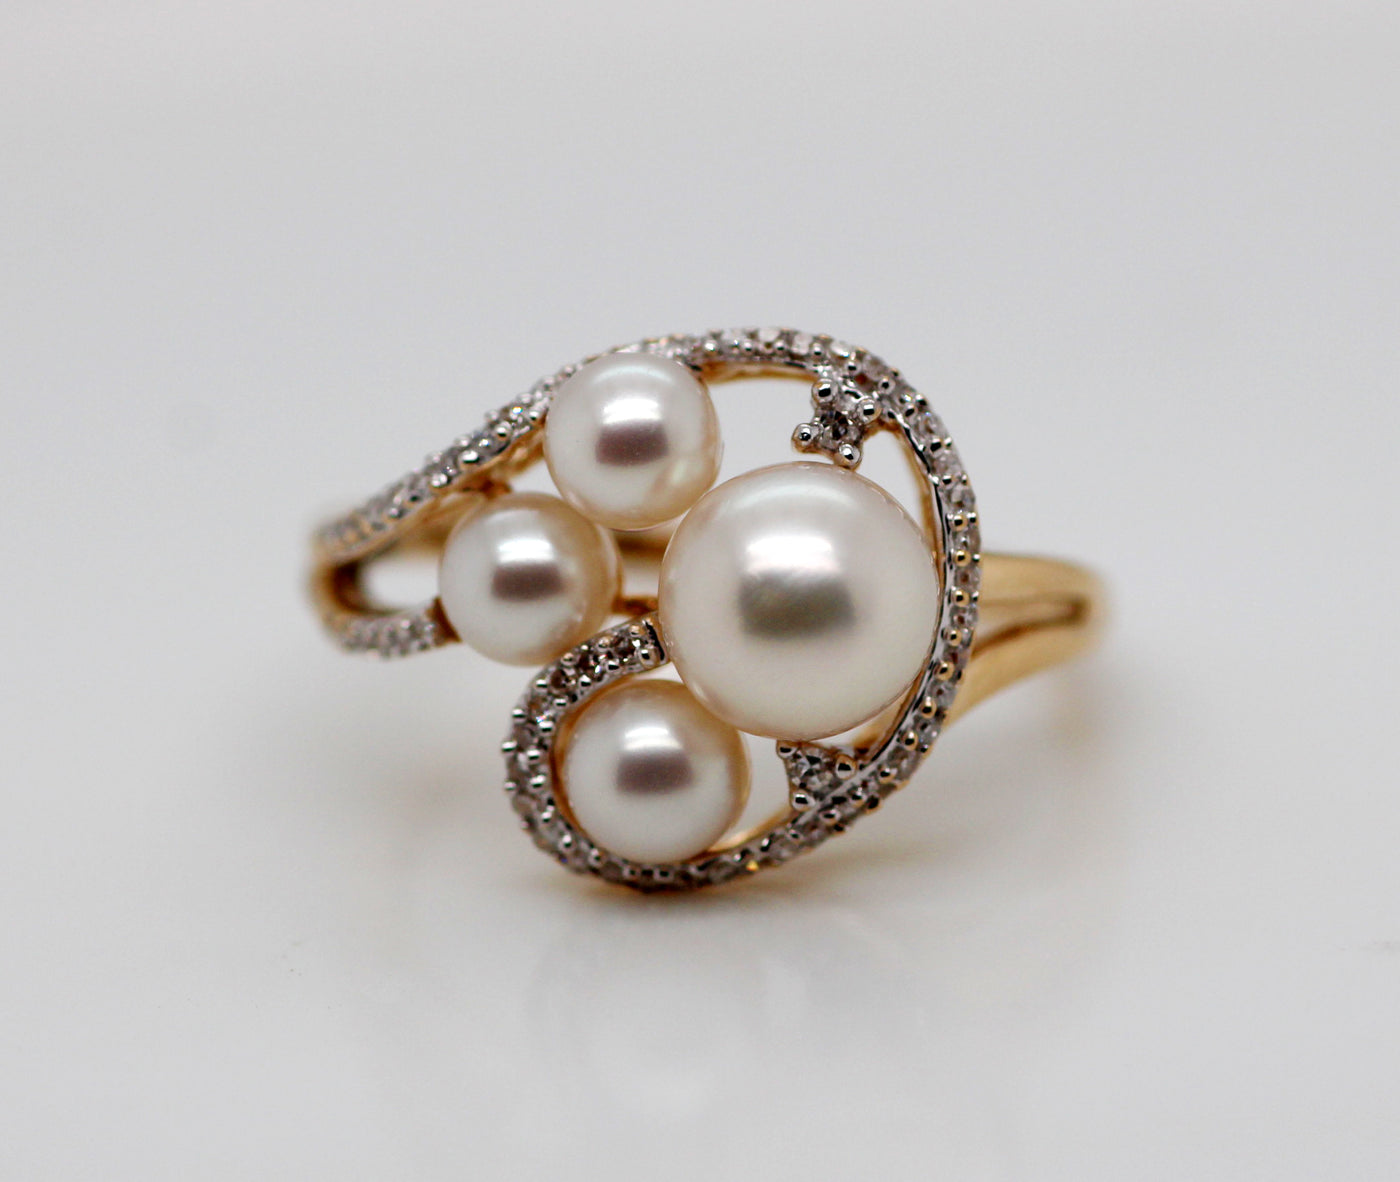 ESTATE 14KY 5MM-7MM PEARL AND DIAMOND RING .30 CTTW HI-SI2